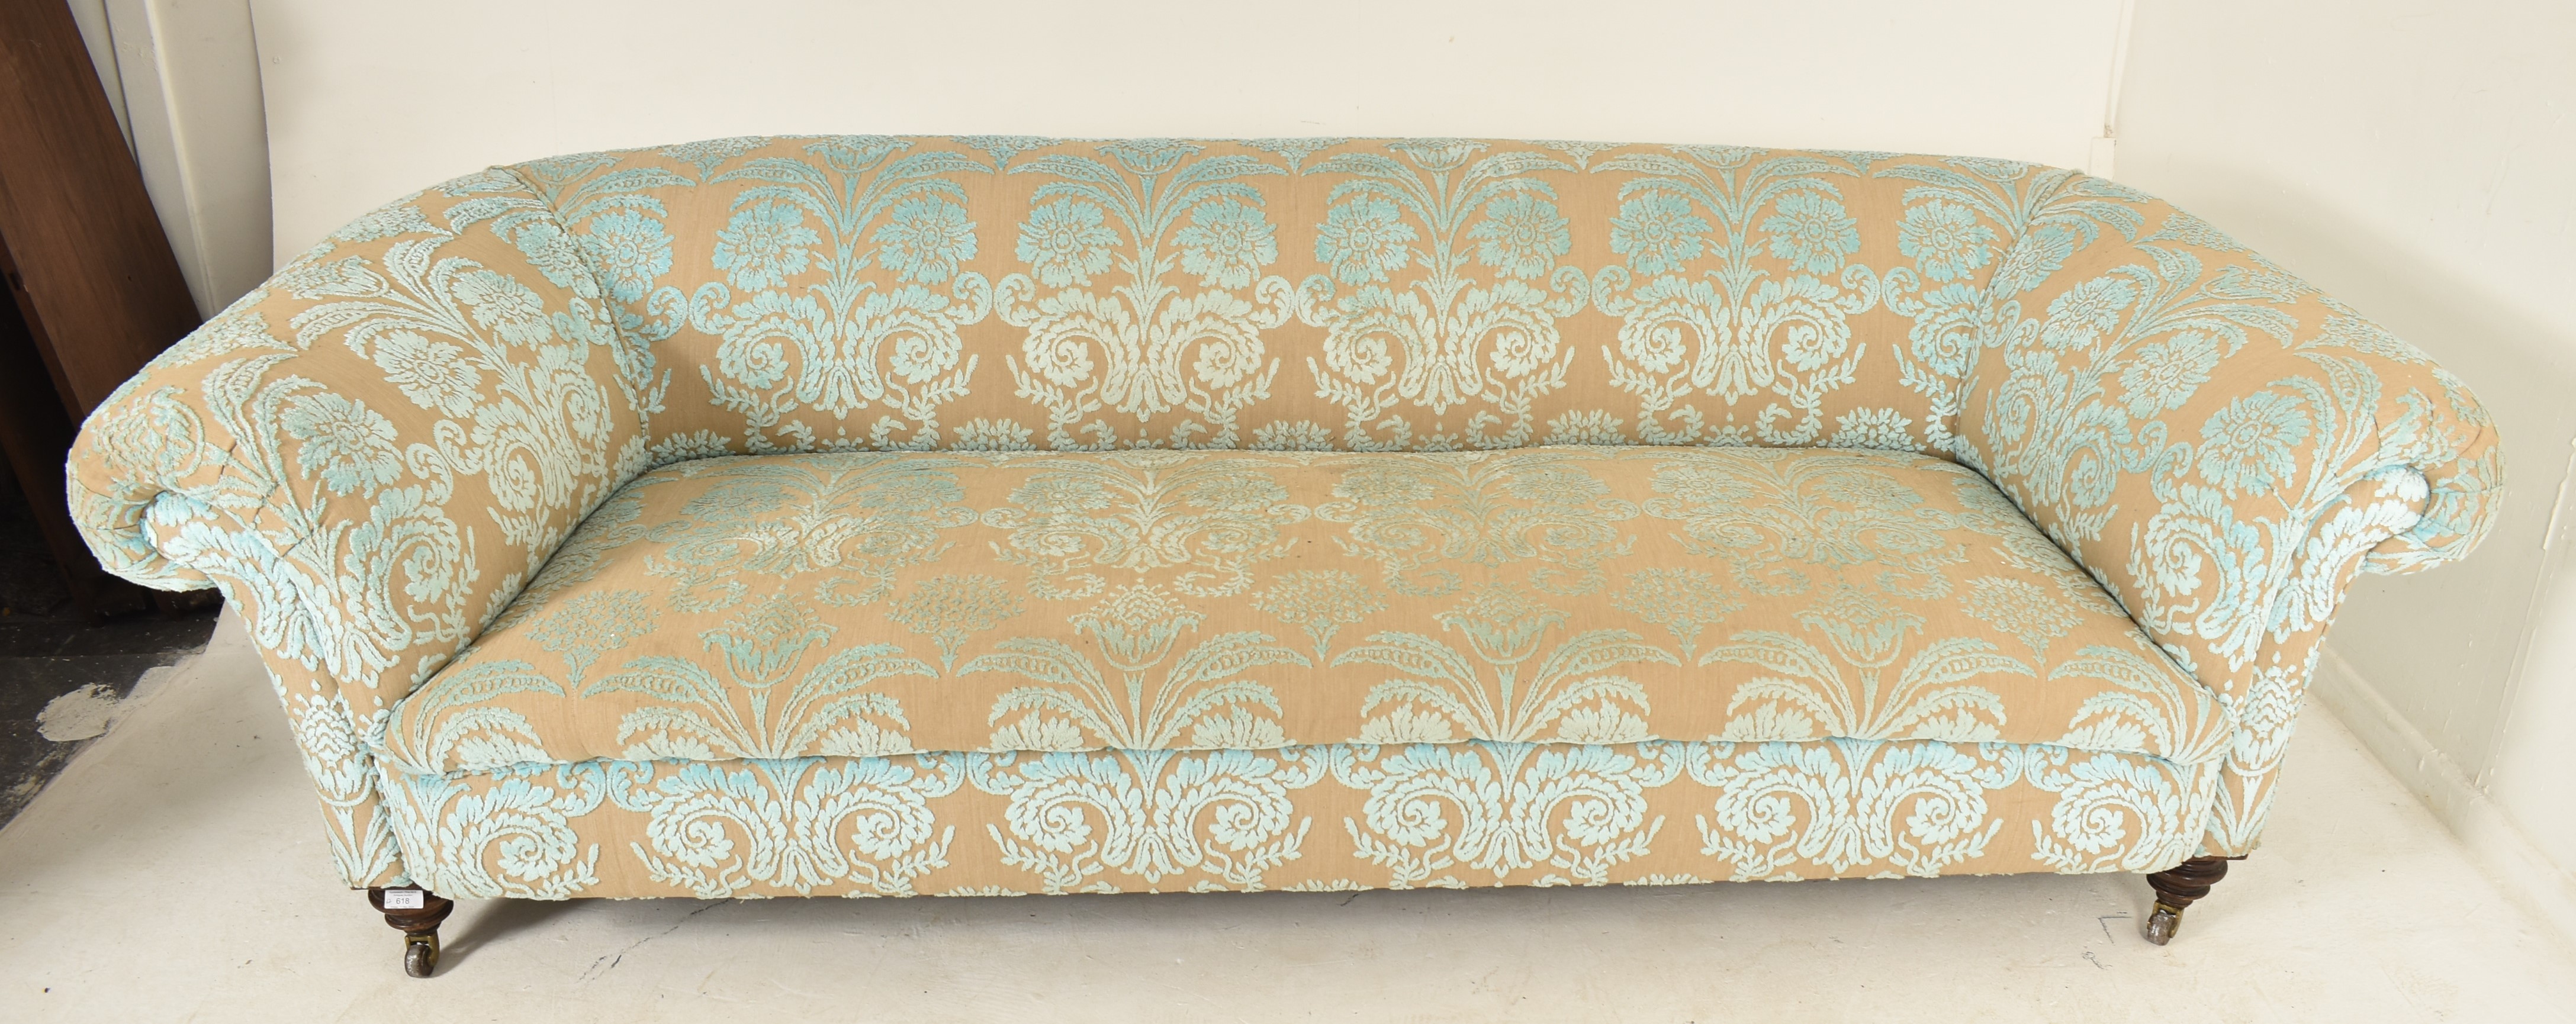 TWO 19TH CENTURY VICTORIAN LARGE CHESTERFIELD SOFAS - Image 2 of 10